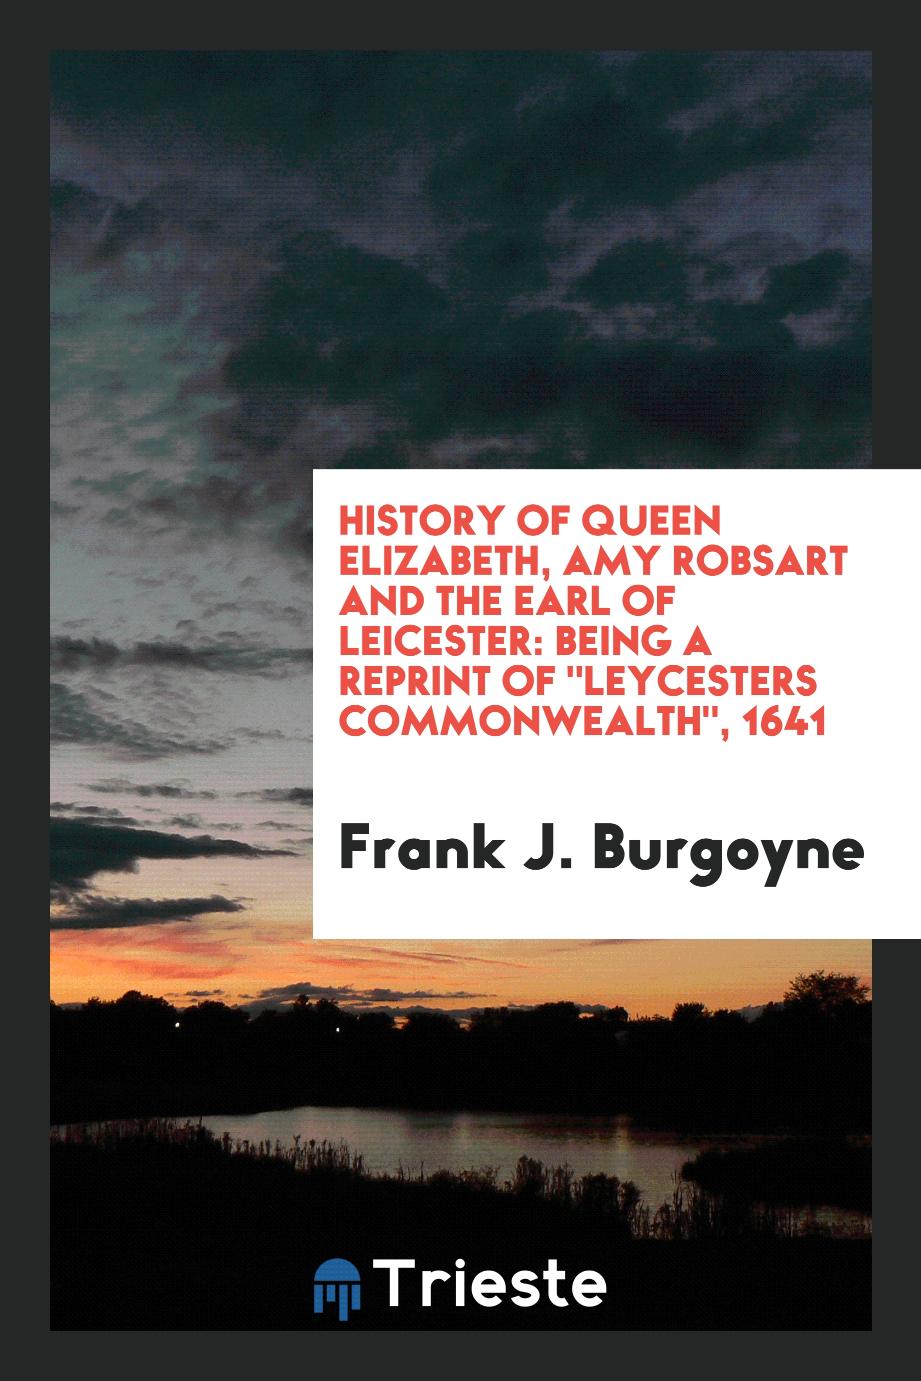 History of Queen Elizabeth, Amy Robsart and the Earl of Leicester: Being a Reprint Of "Leycesters Commonwealth", 1641